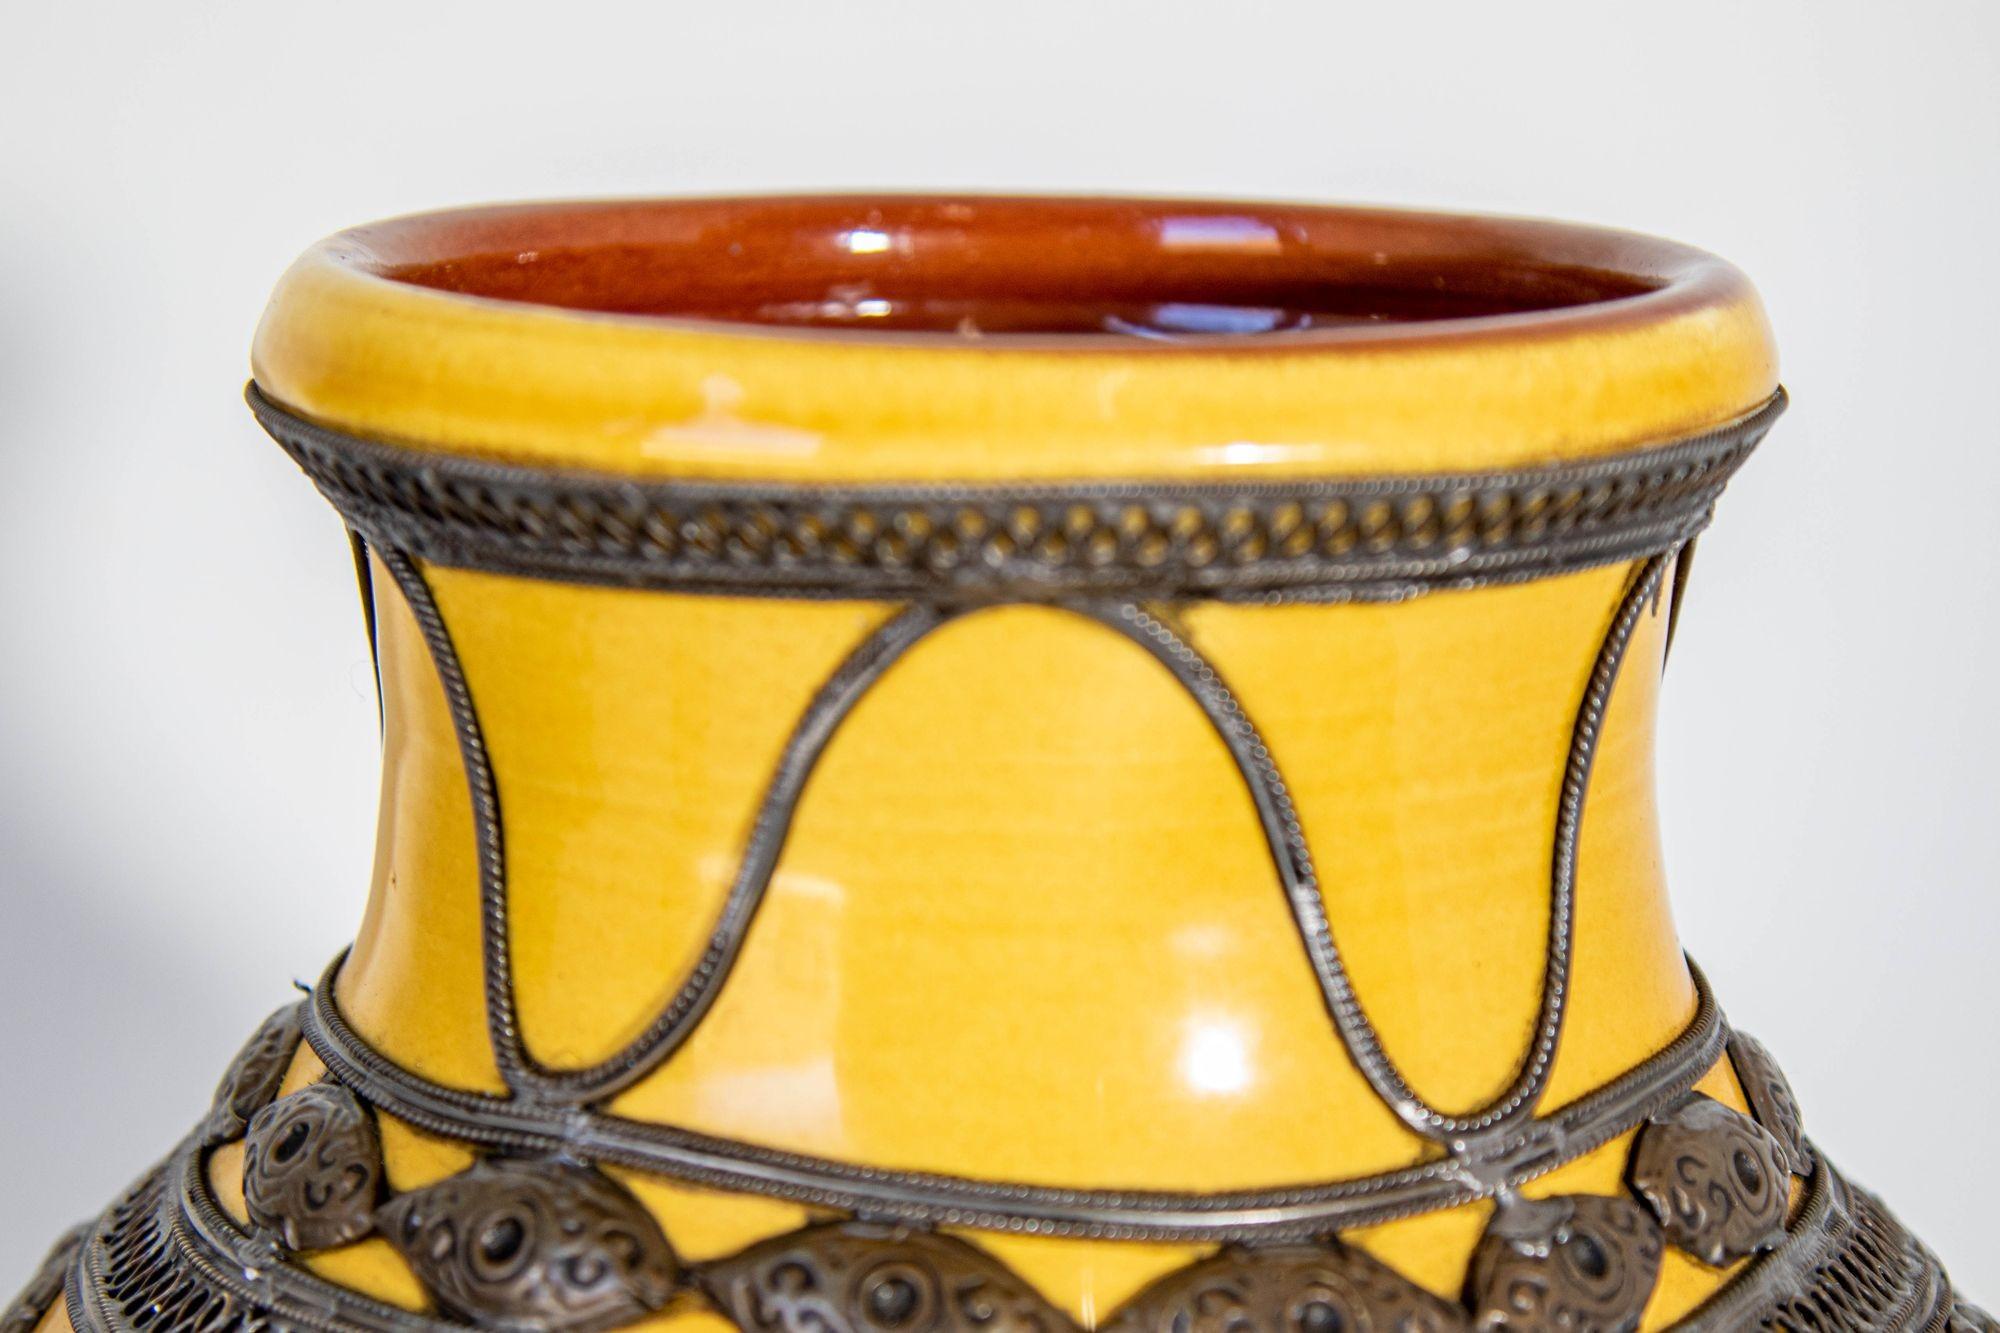 Antique Moroccan Ceramic Vase Bright Yellow with Metal Moorish Filigree overlaid In Good Condition For Sale In North Hollywood, CA